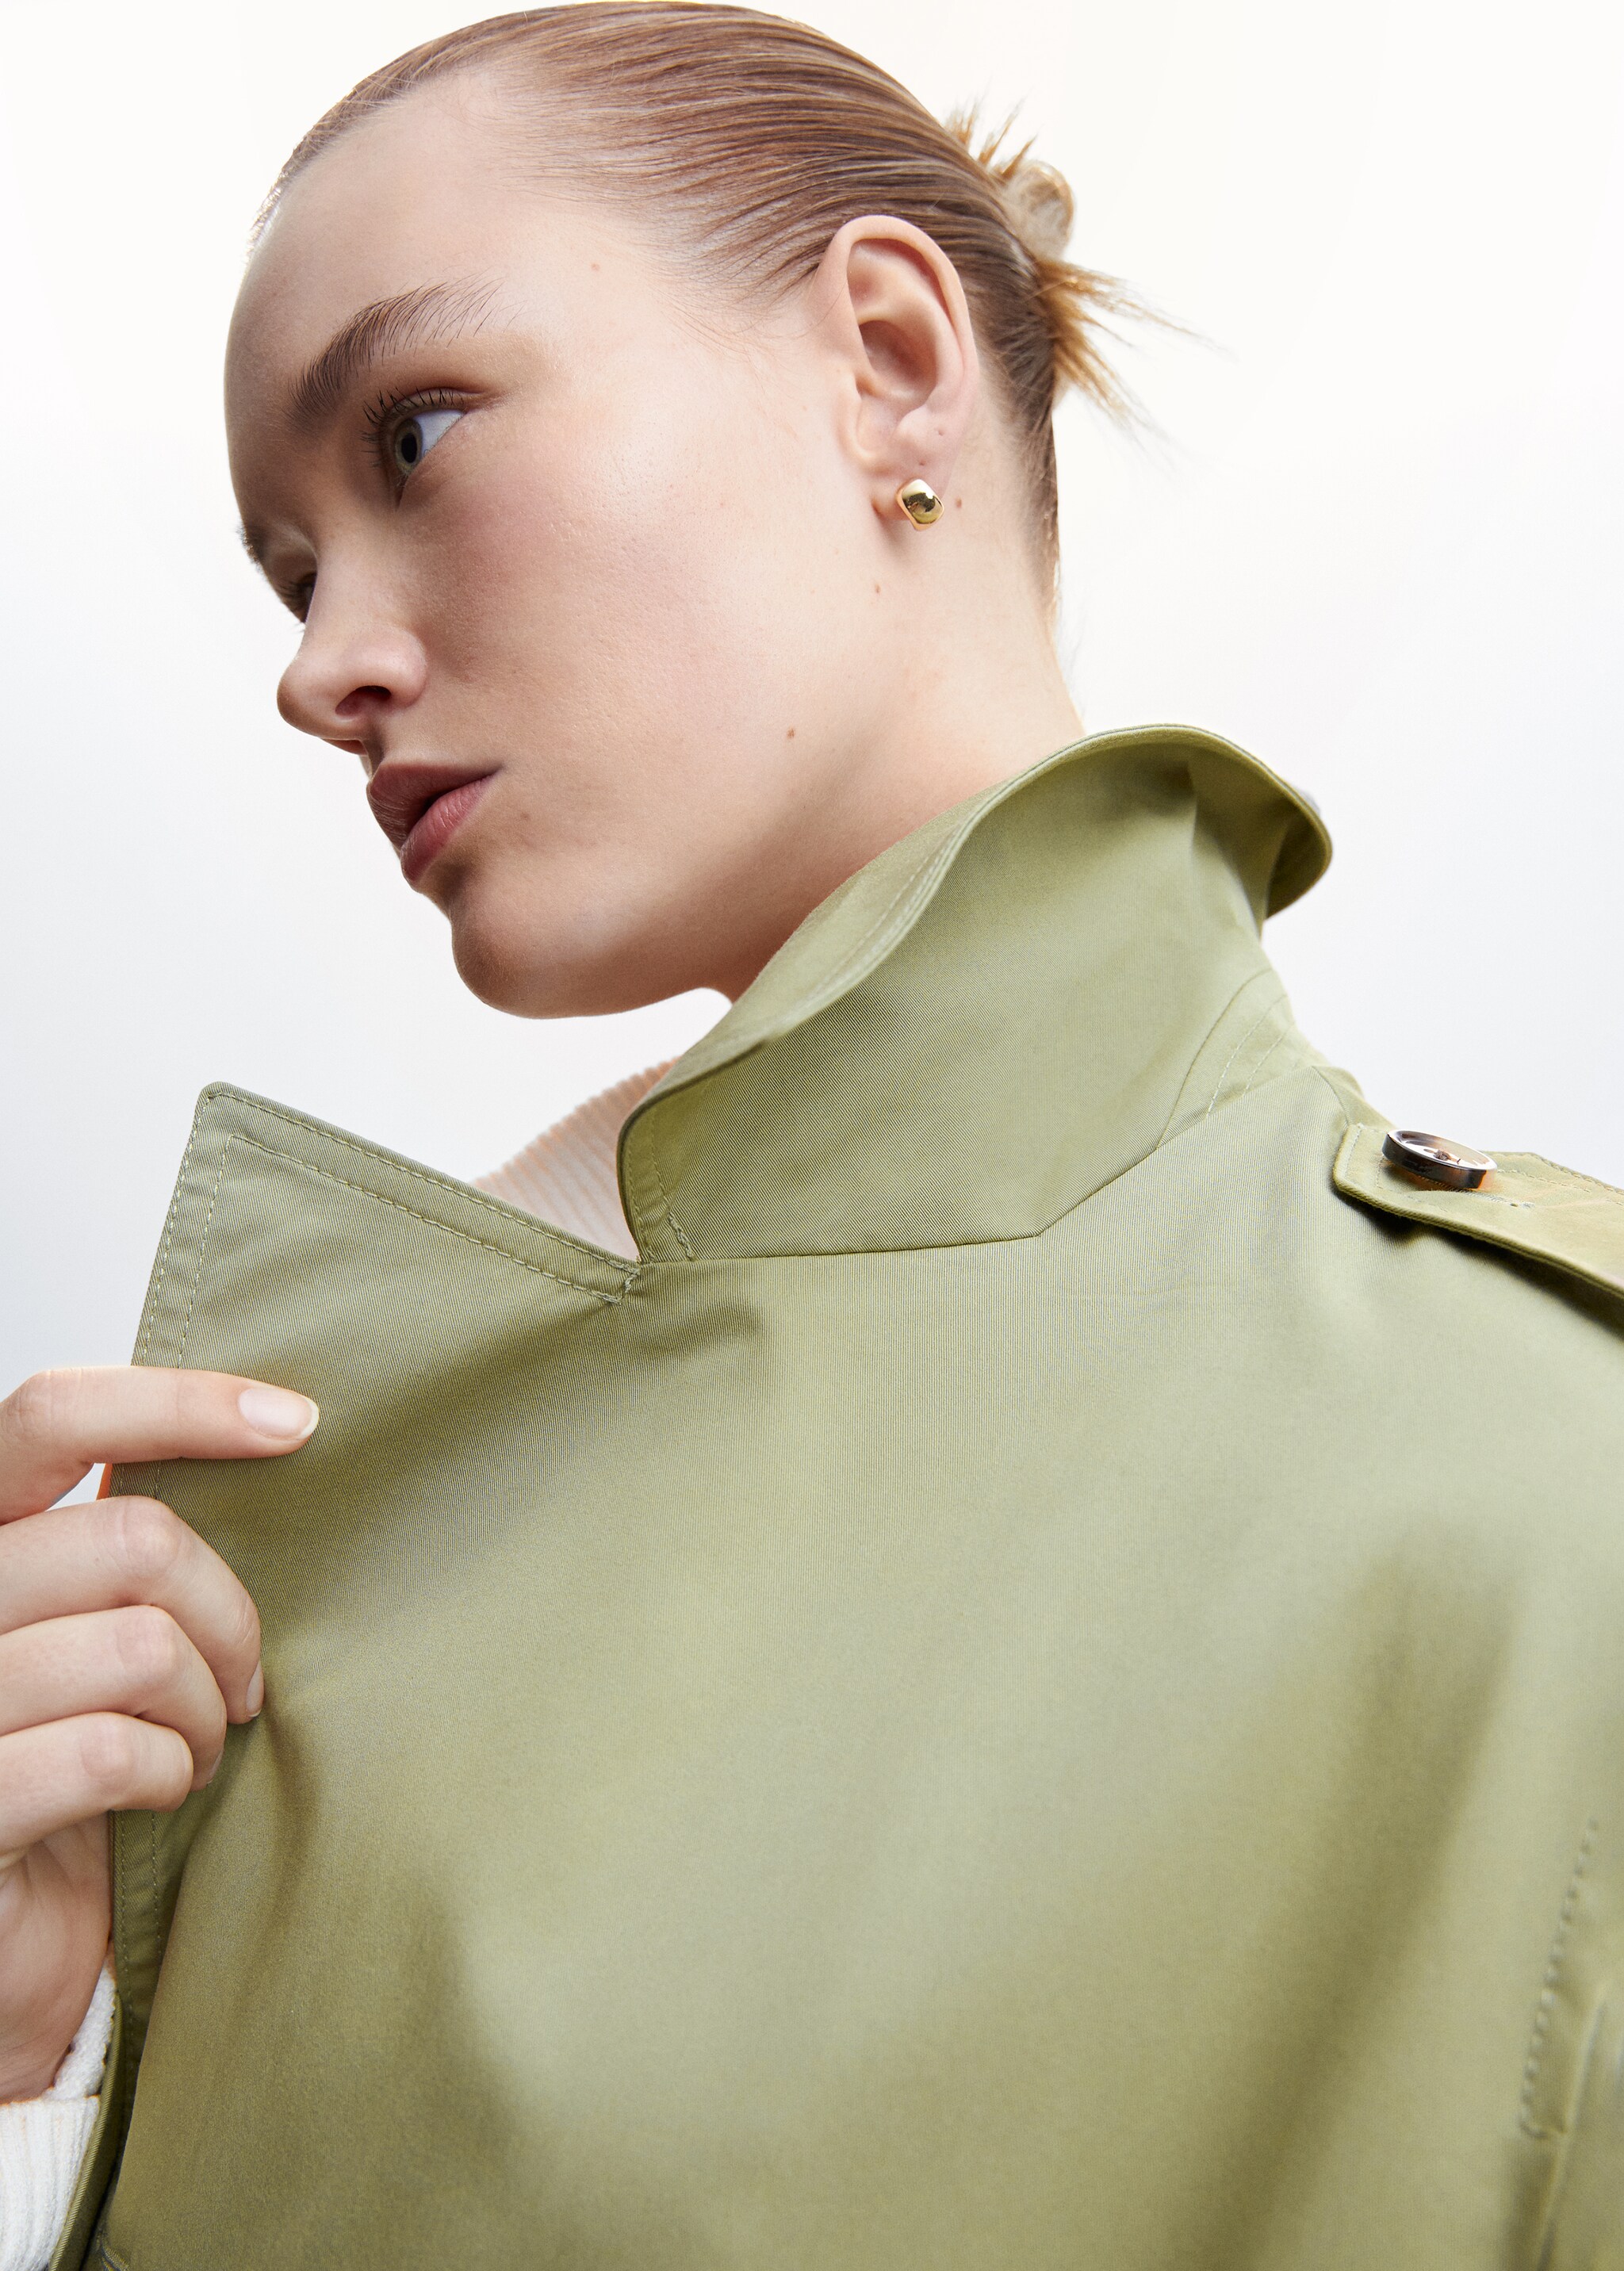 Double-button trench coat - Details of the article 4